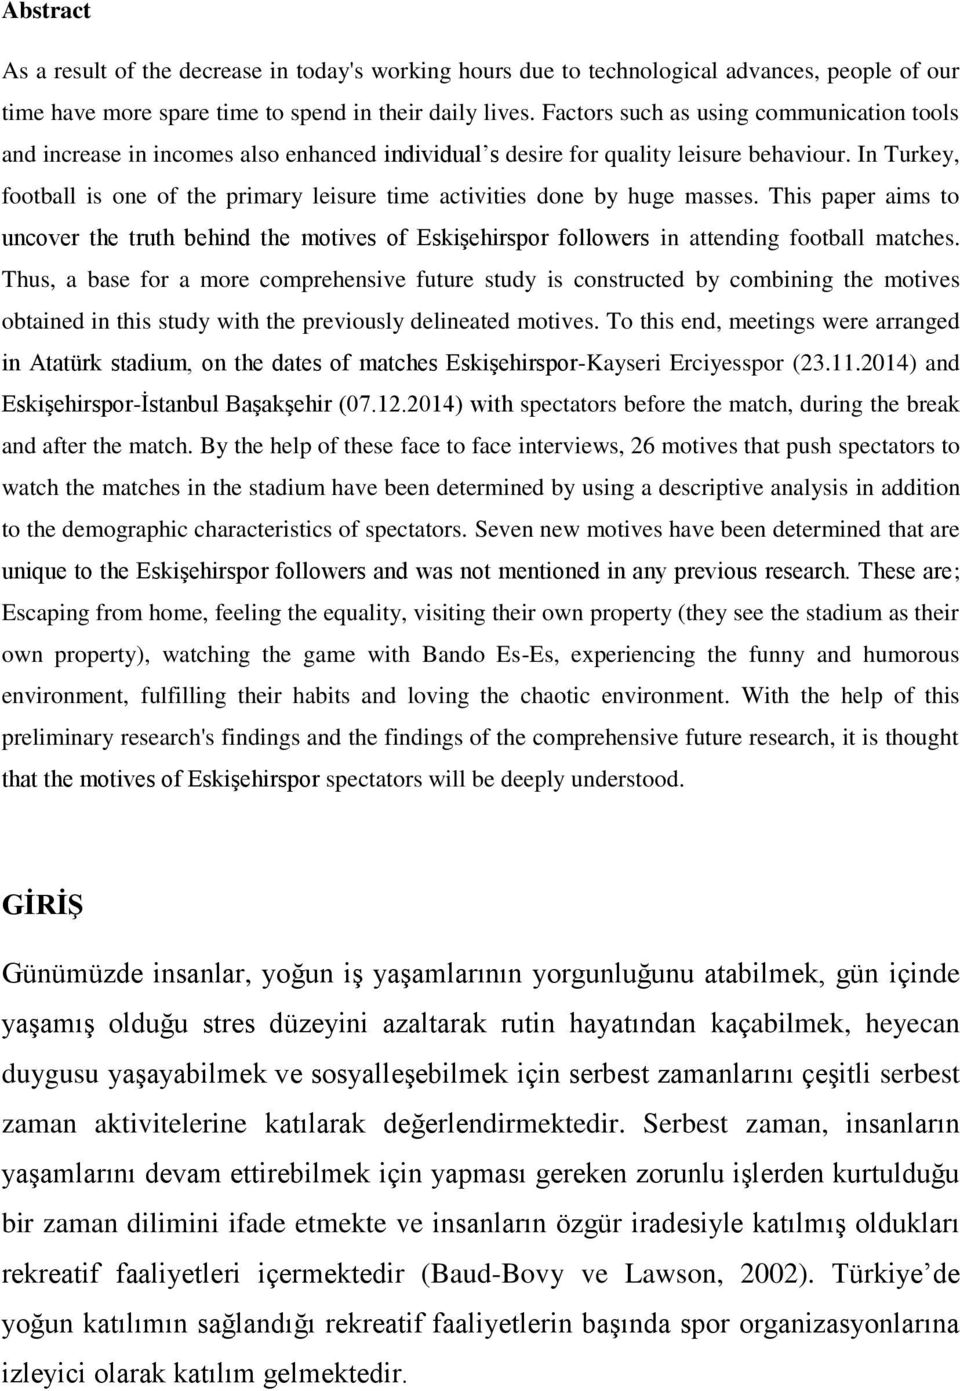 In Turkey, football is one of the primary leisure time activities done by huge masses. This paper aims to uncover the truth behind the motives of Eskişehirspor followers in attending football matches.